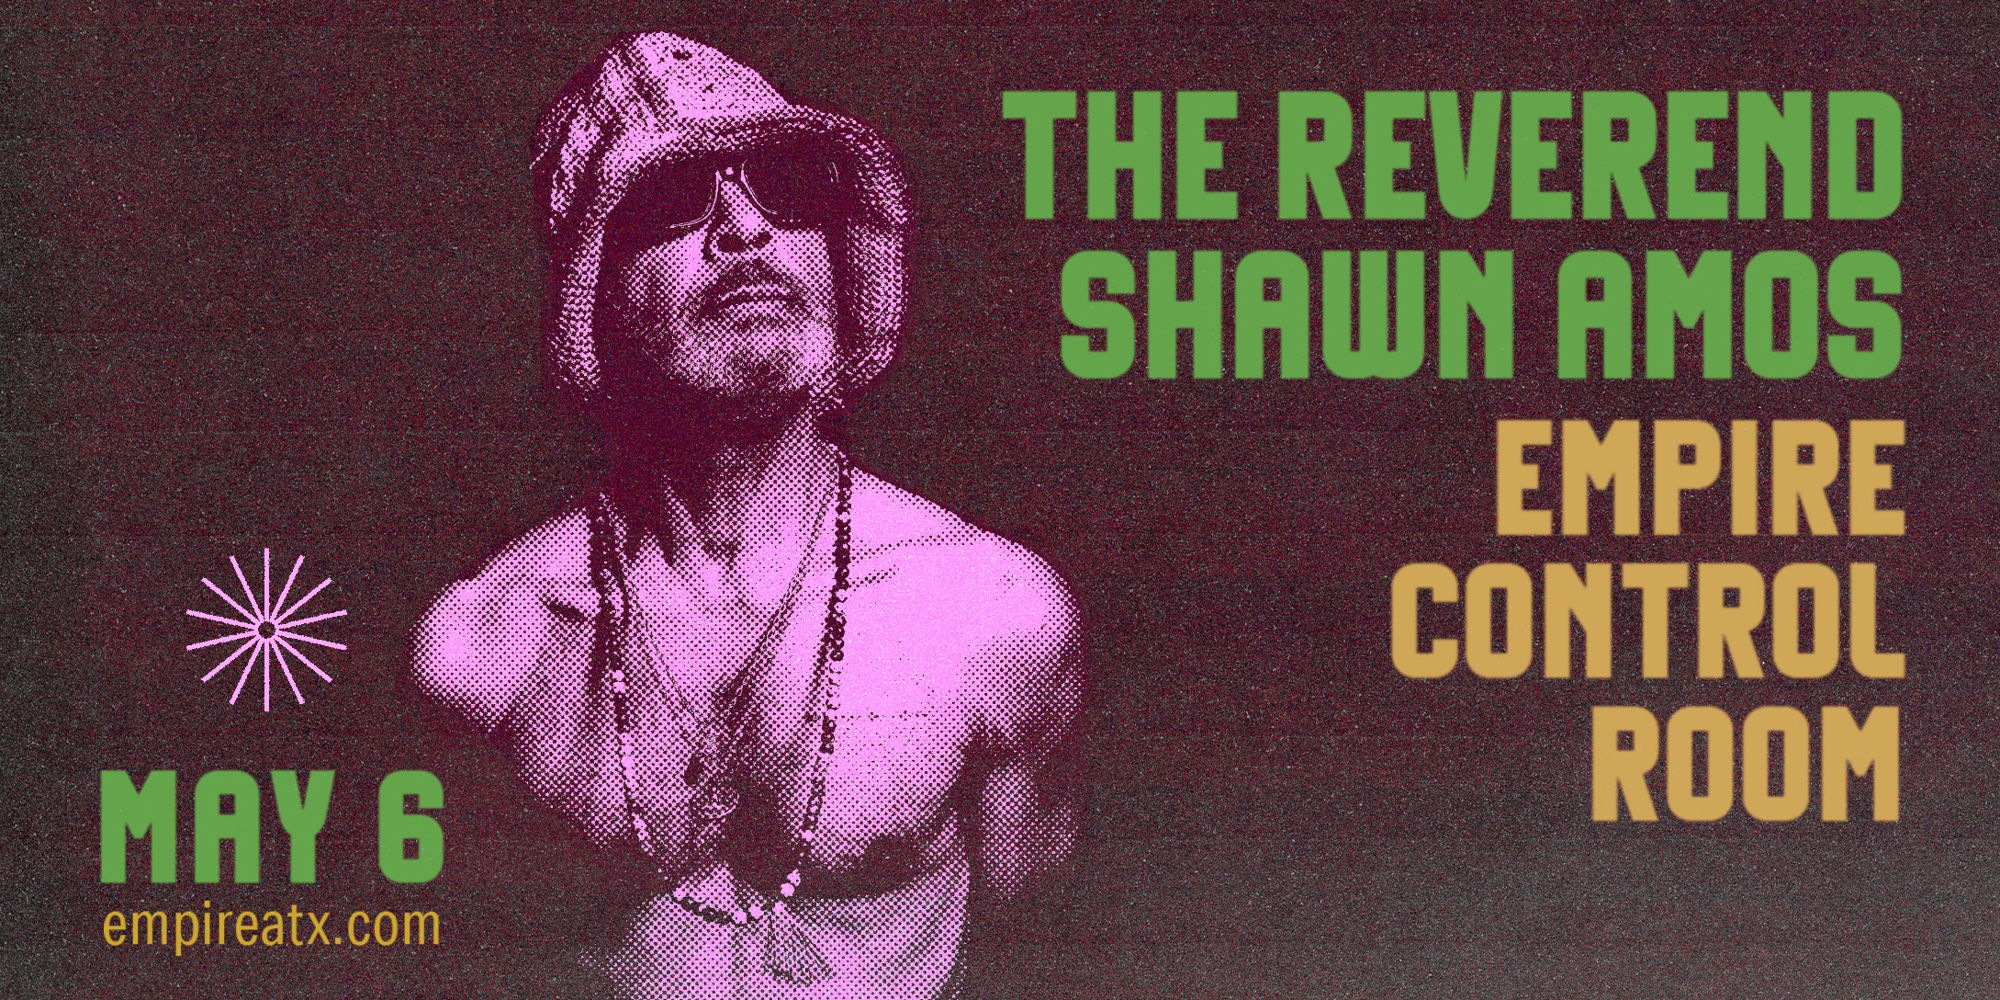 Empire Presents: The Reverend Shawn Amos at Empire Garage 5/6 promotional image